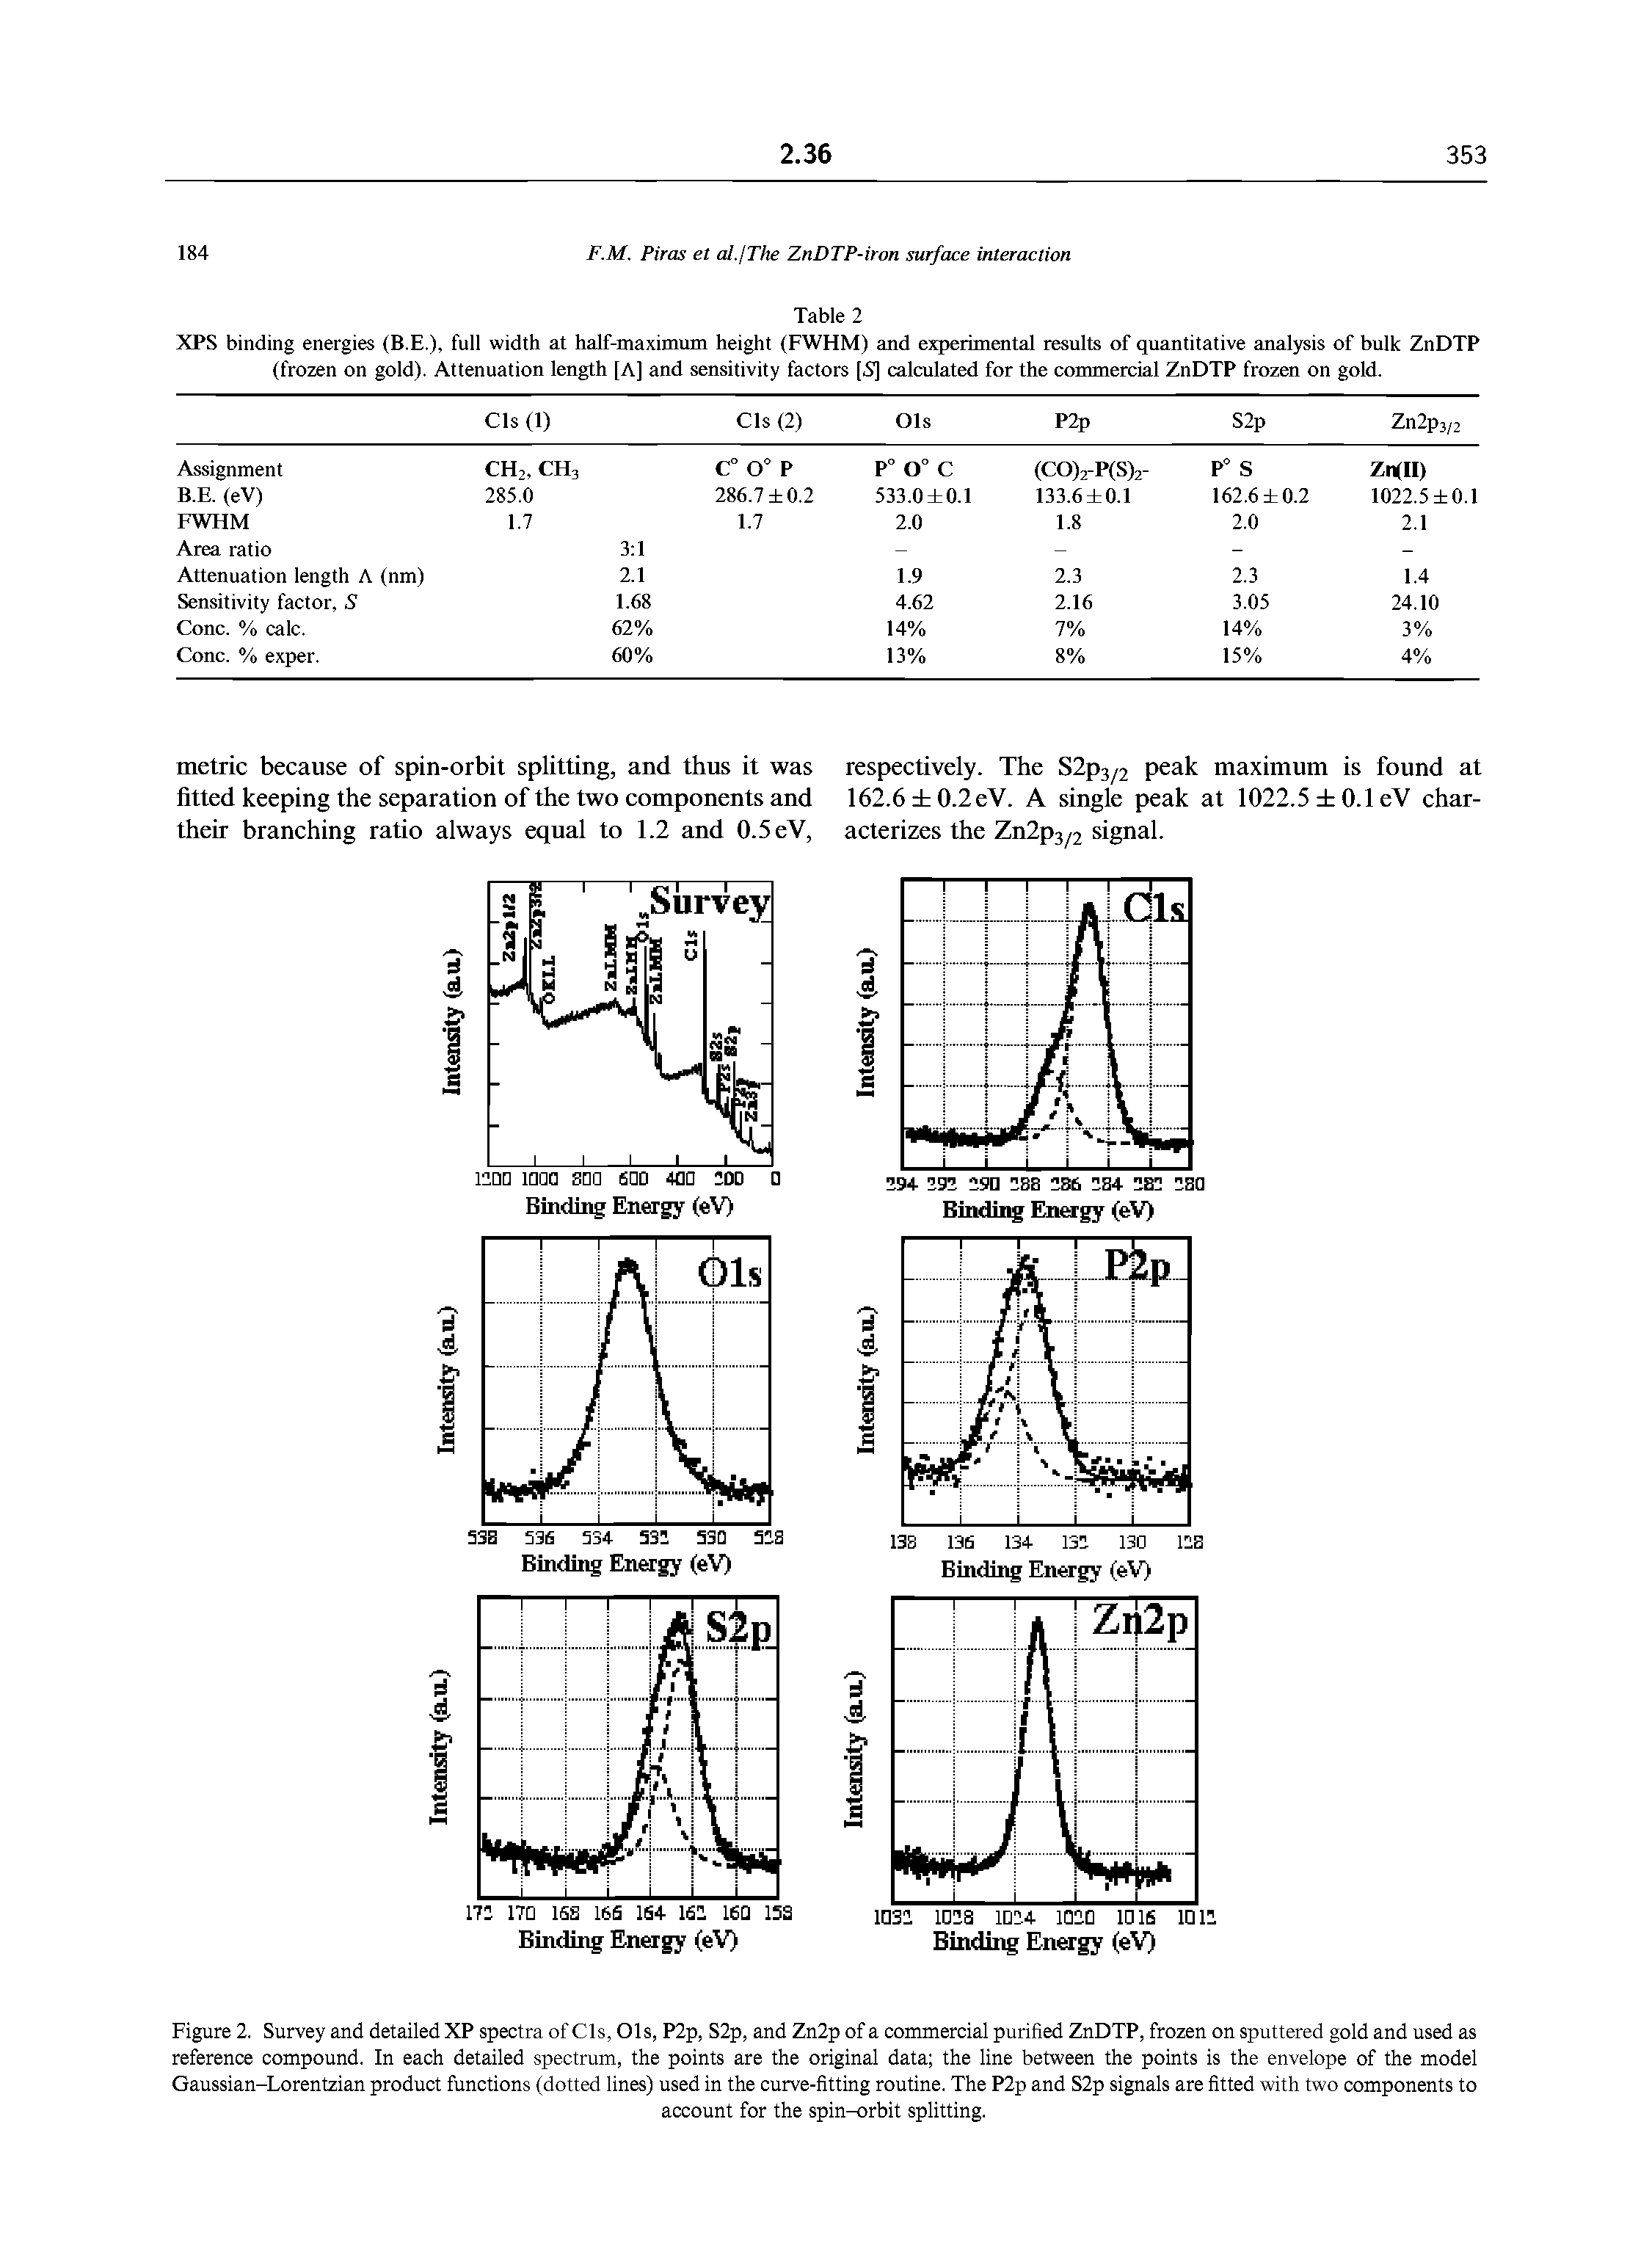 Figure 2. Survey and detailed XP spectra of Cls, Ols, P2p, S2p, and Zn2p of a commercial purified ZnDTP, frozen on sputtered gold and used as reference compound. In each detailed spectrum, the points are the original data the line between the points is the envelope of the model Gaussian-Lorentzian product functions (dotted lines) used in the curve-fitting routine. The P2p and S2p signals are fitted with two components to...